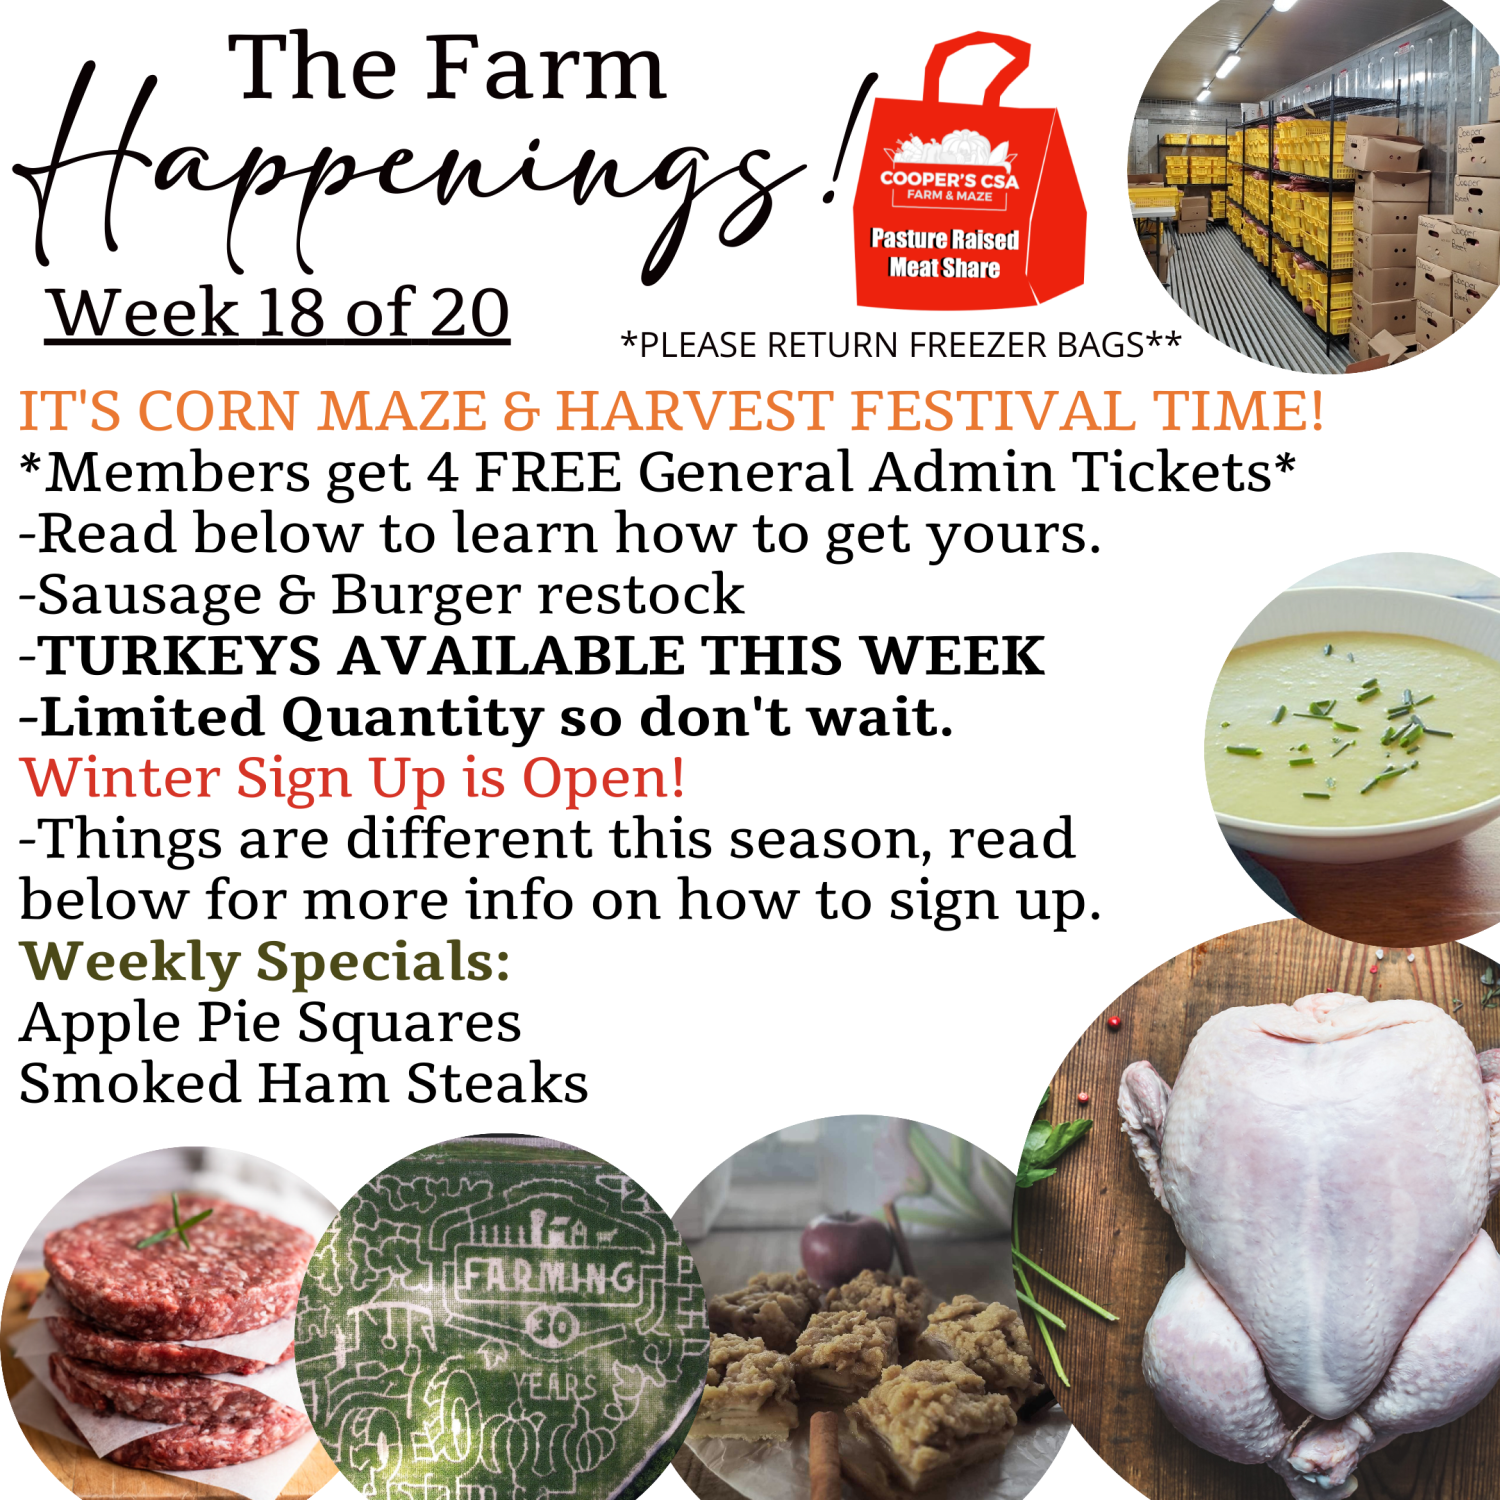 Previous Happening: "Pasture Meat Shares"-Coopers CSA Farm Farm Happenings Week 18